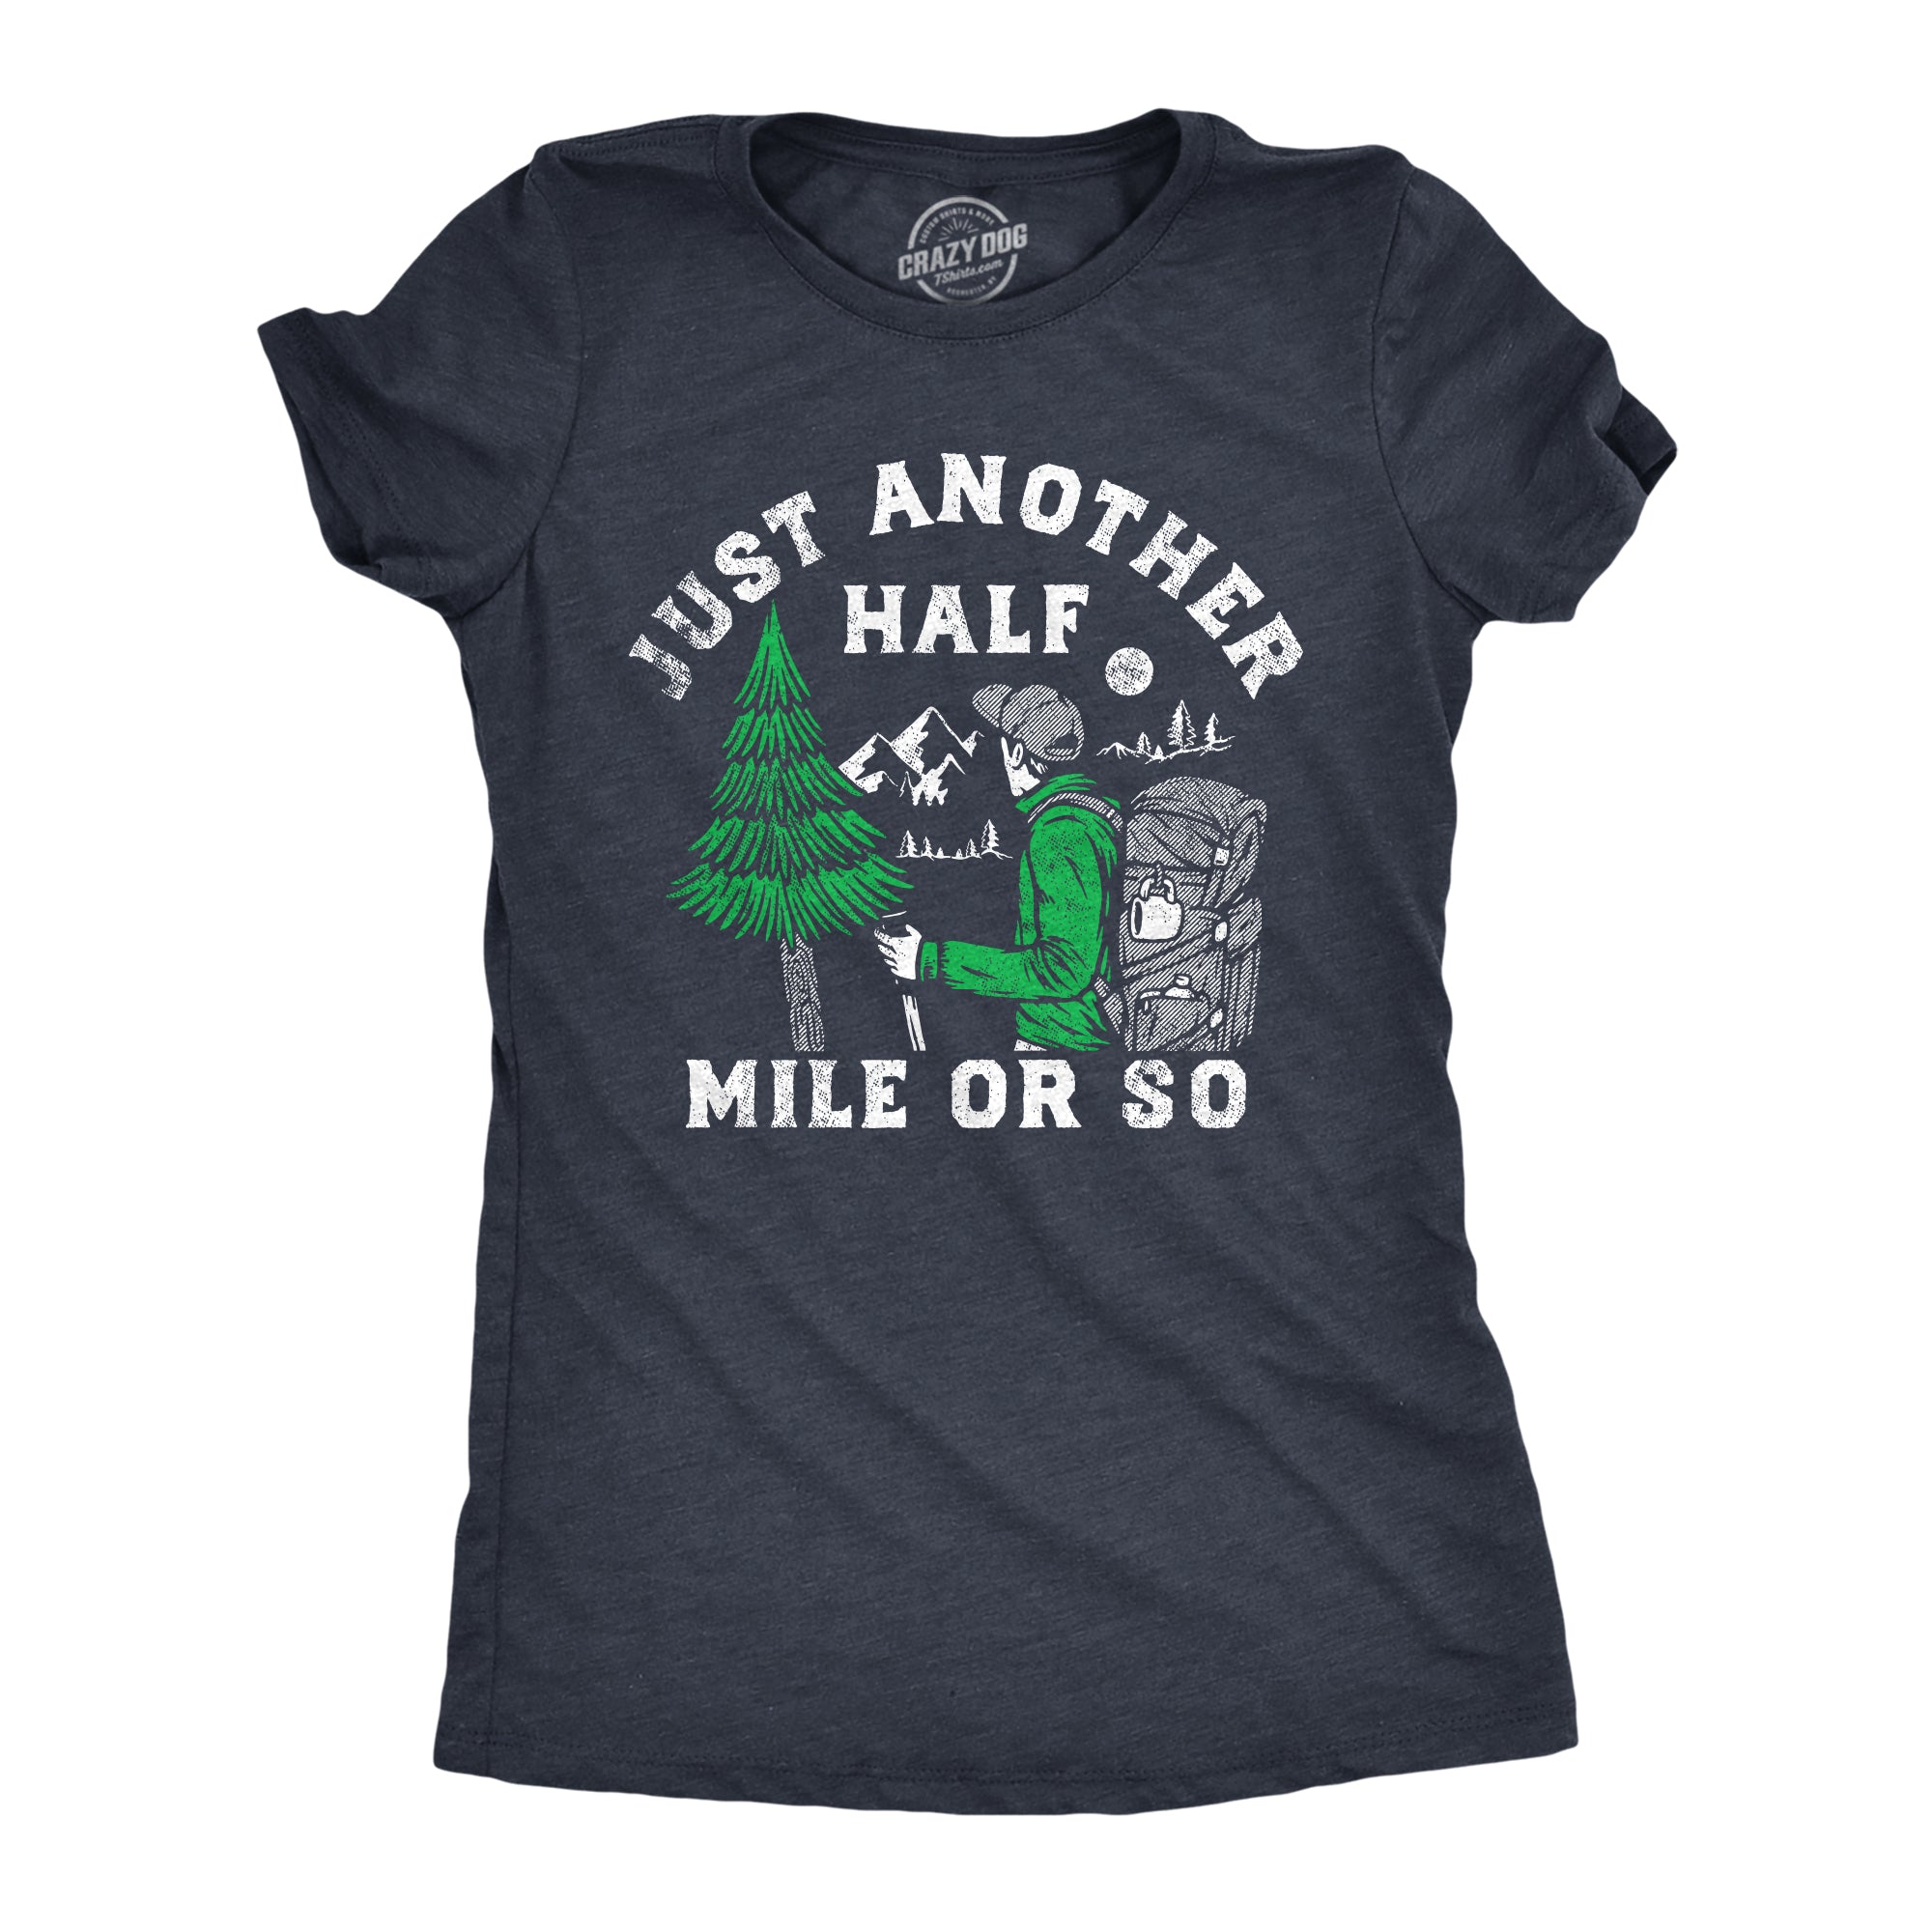 Funny Heather Navy - Another Half Mile Just Another Half Mile Or So Womens T Shirt Nerdy Sarcastic Tee